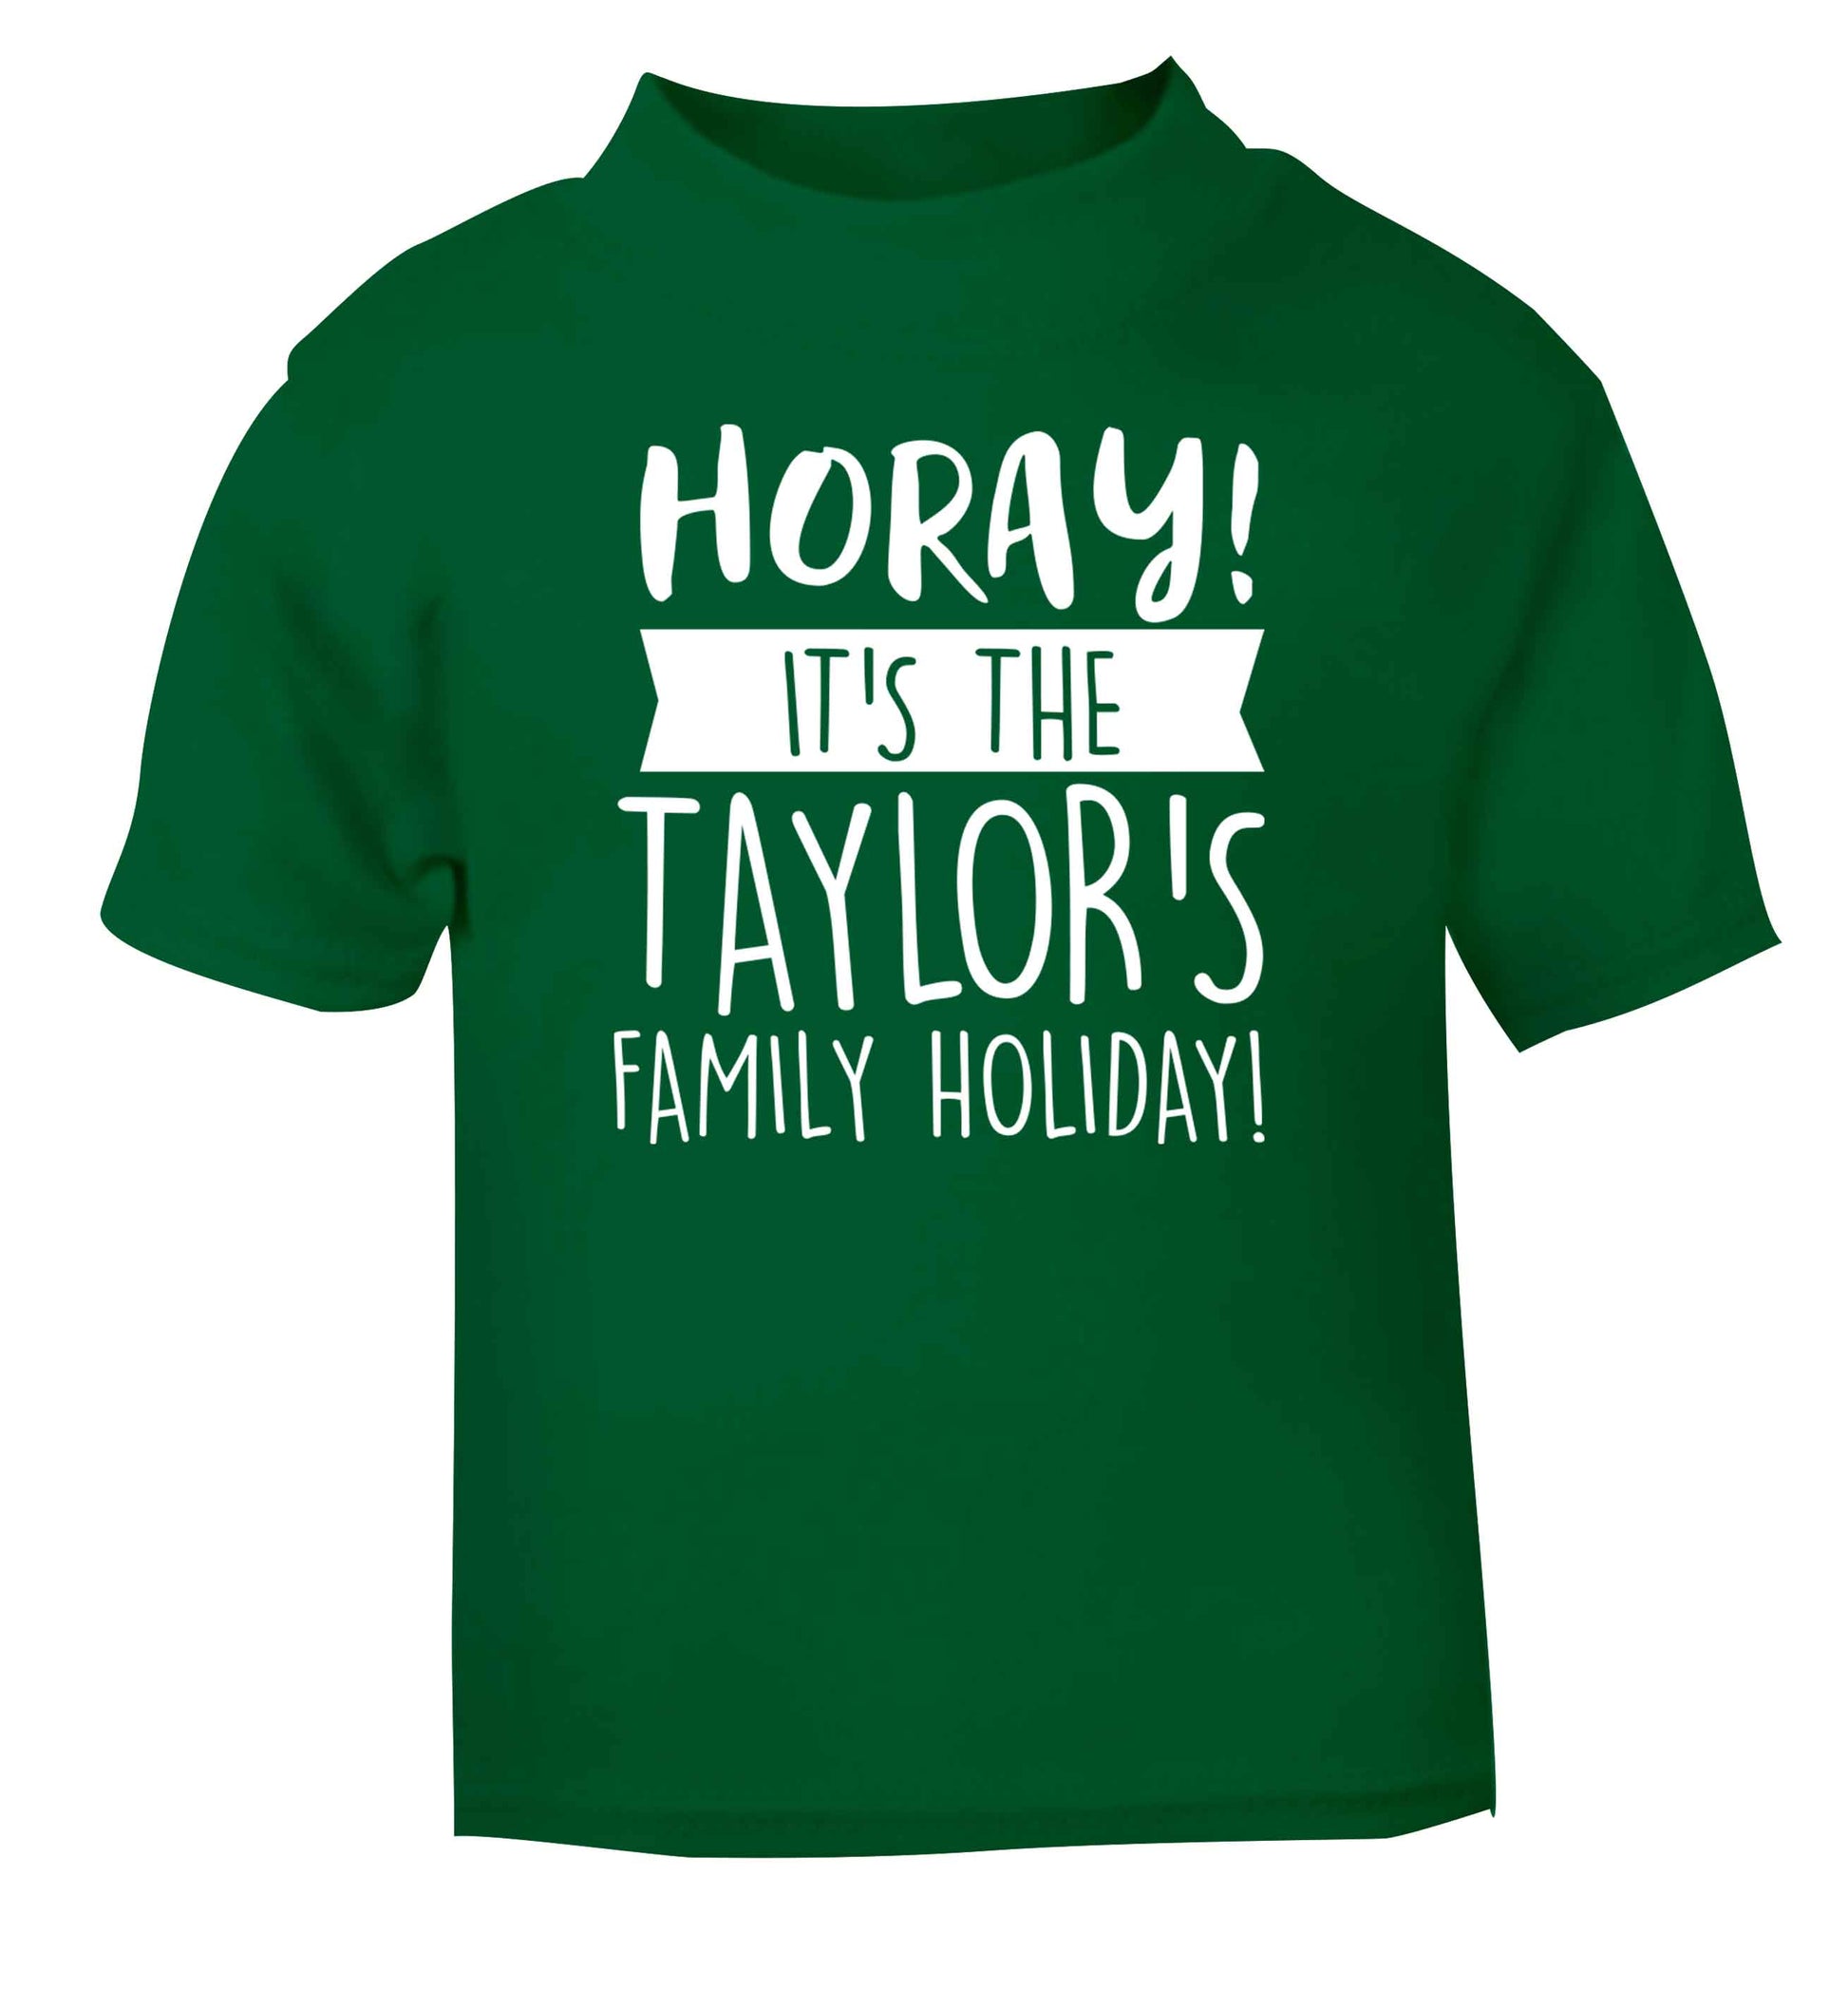 Horay it's the Taylor's family holiday! personalised item green Baby Toddler Tshirt 2 Years